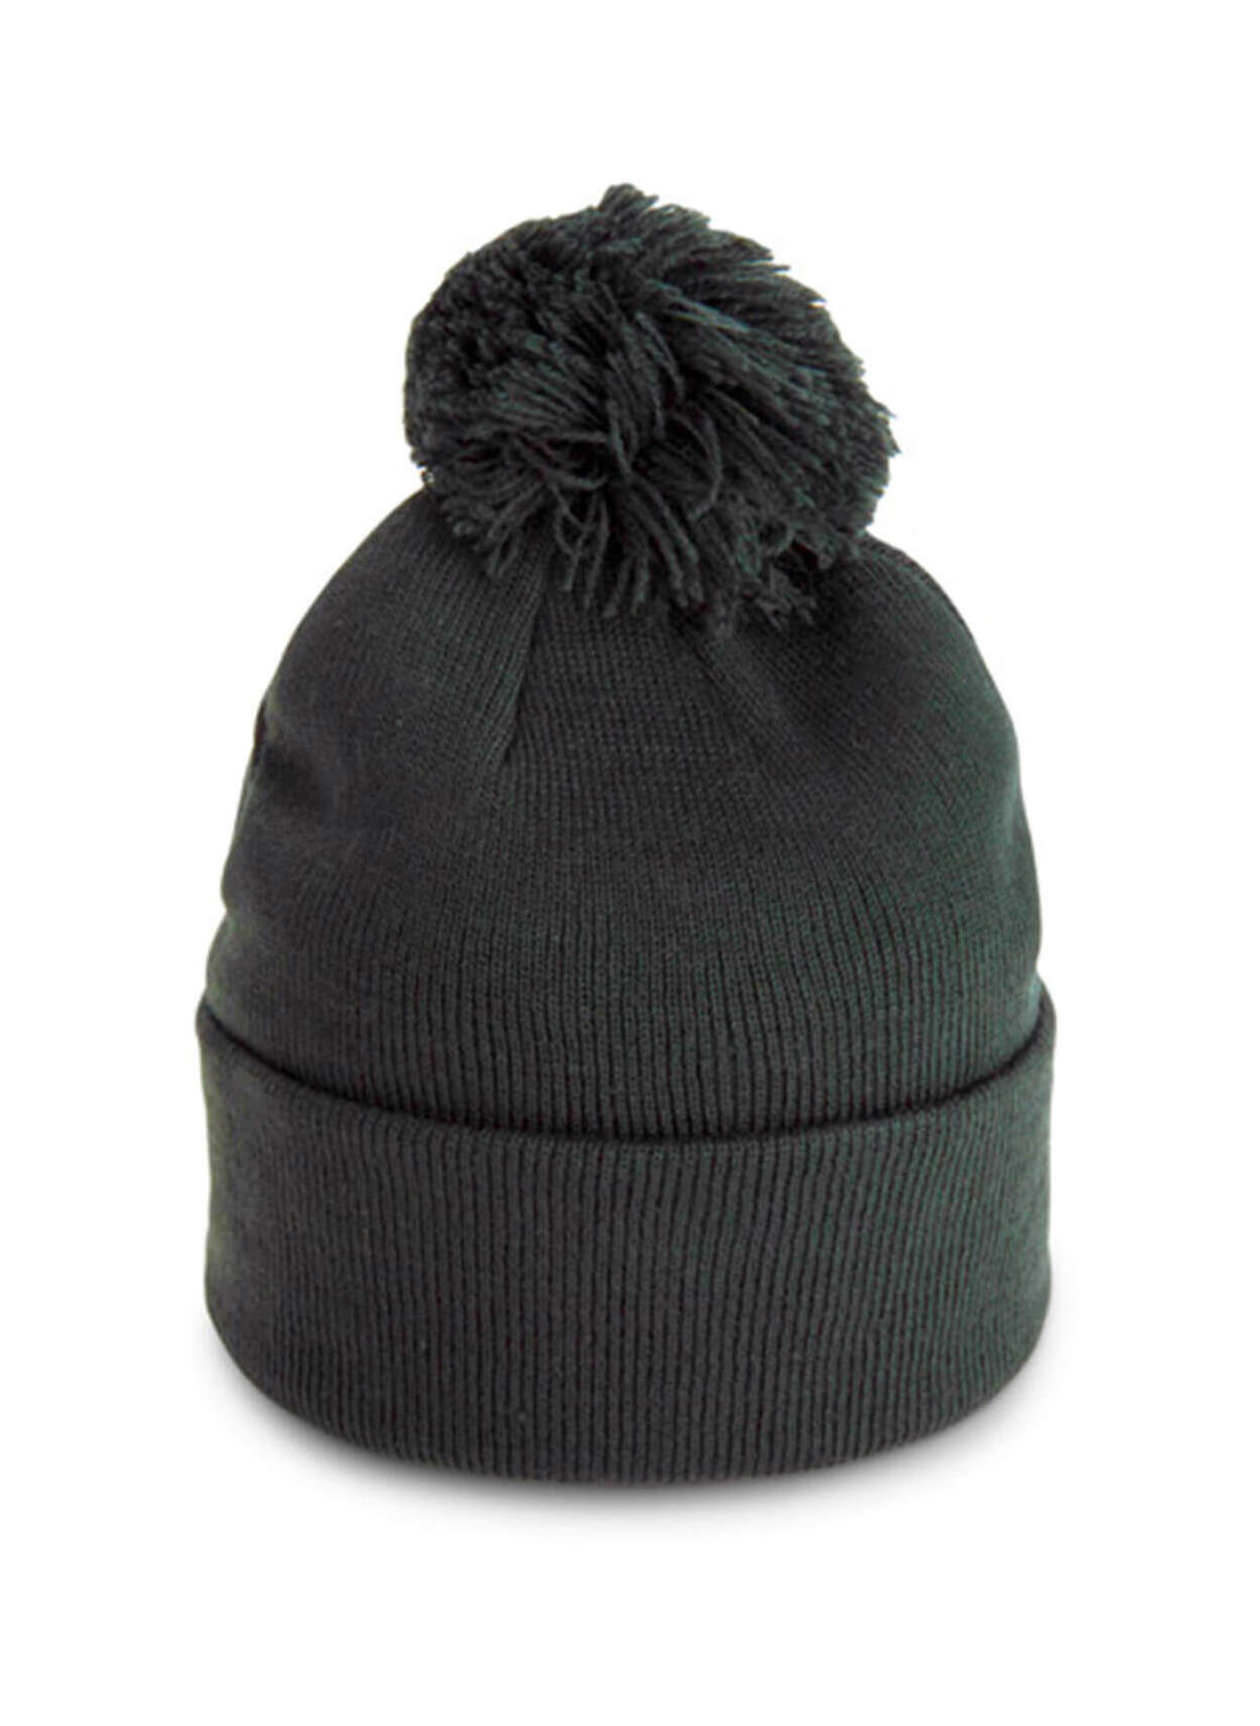 Imperial Dark Green The Tahoe Knit Beanie with Pom